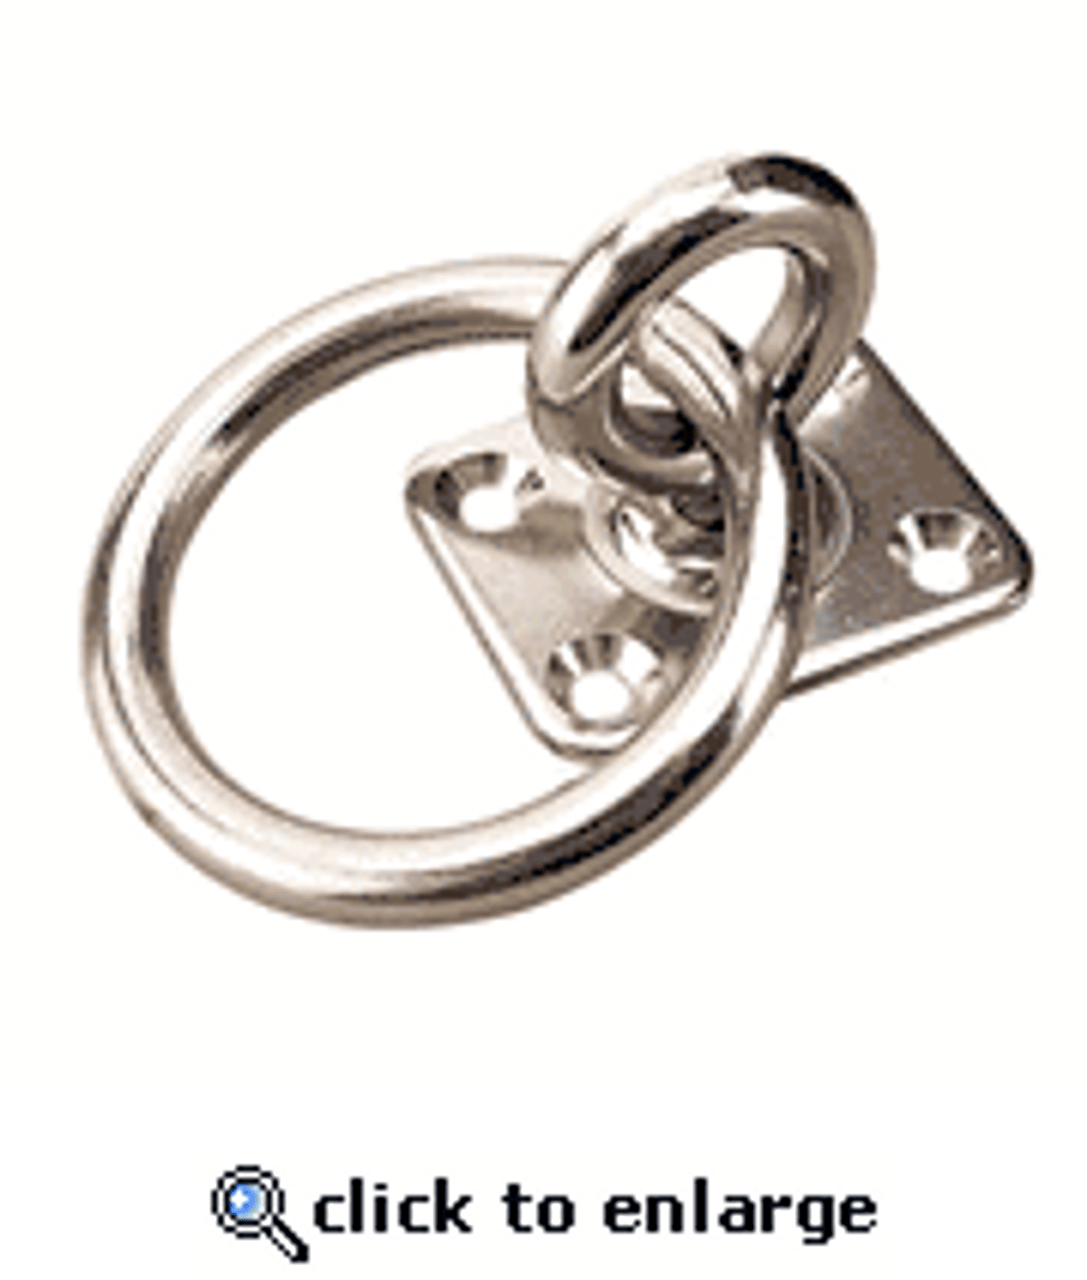 Sea Dog Stainless Steel Swivel Eye Plate with Ring